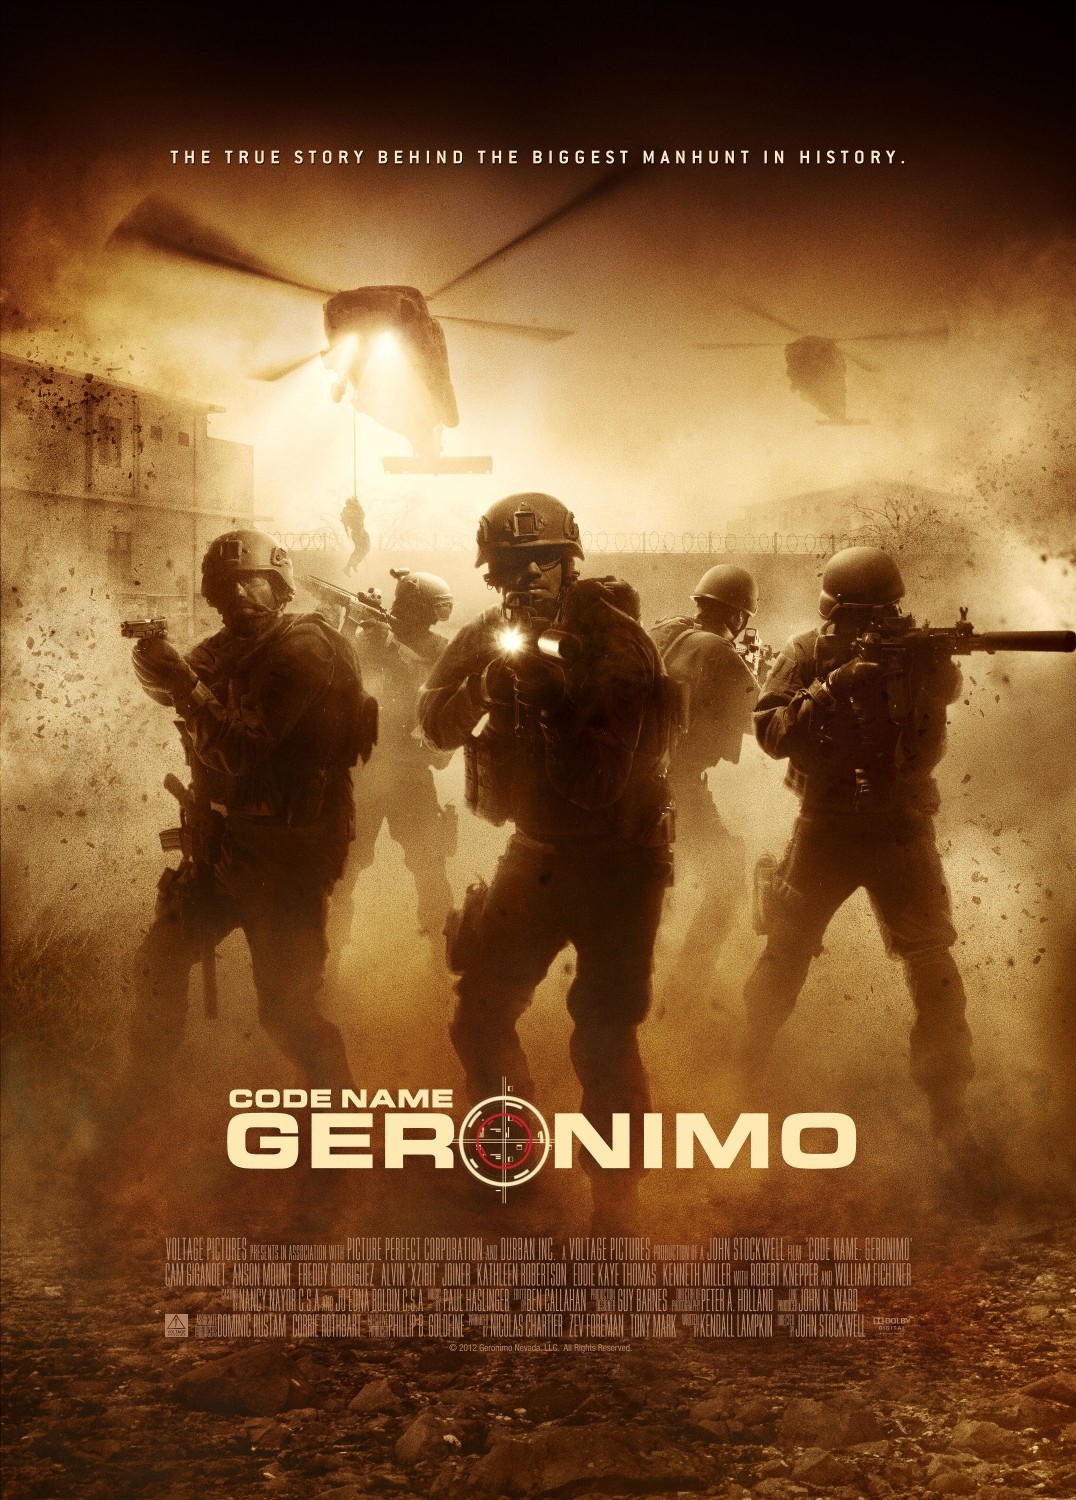 Extra Large Movie Poster Image for Code Name: Geronimo (#1 of 3)